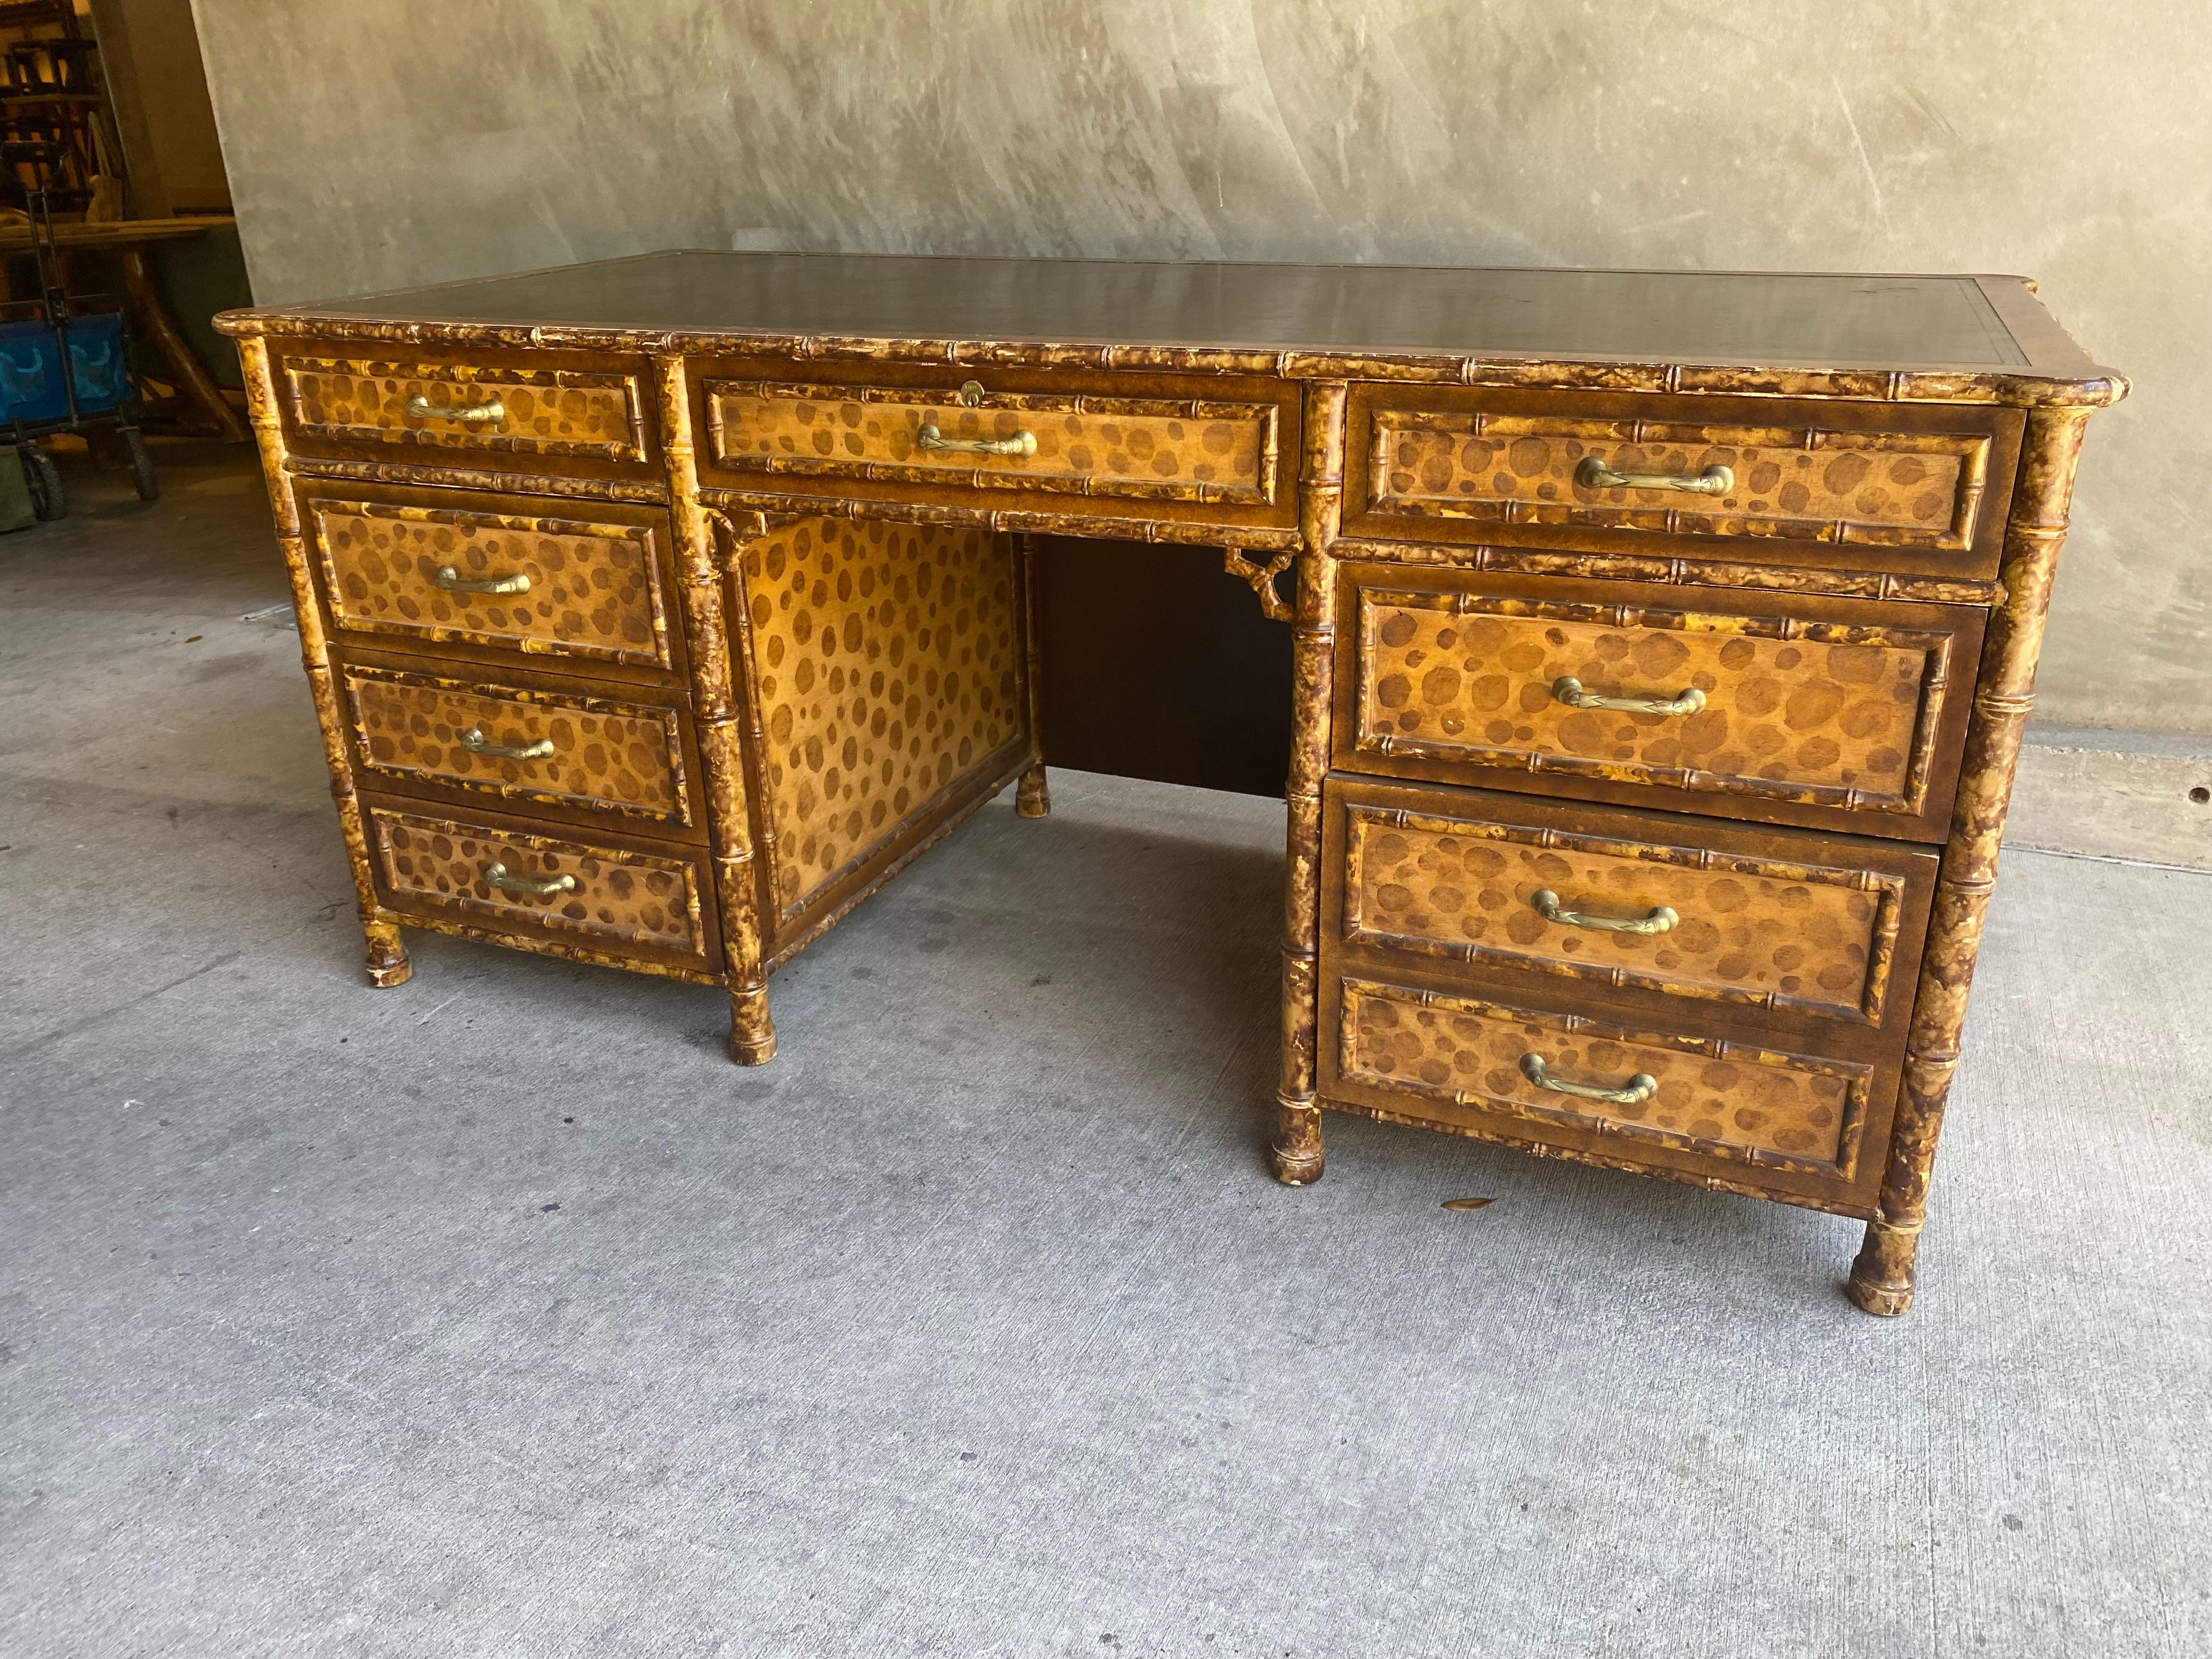 A high style desk, finished on all sides in hand painted faux bamboo and tortoise shell (almost leopard print). Well made piece of furniture, heavy and with nice joinery. Inset leather top is coffee to ebony in color. Side drawers are locking, but